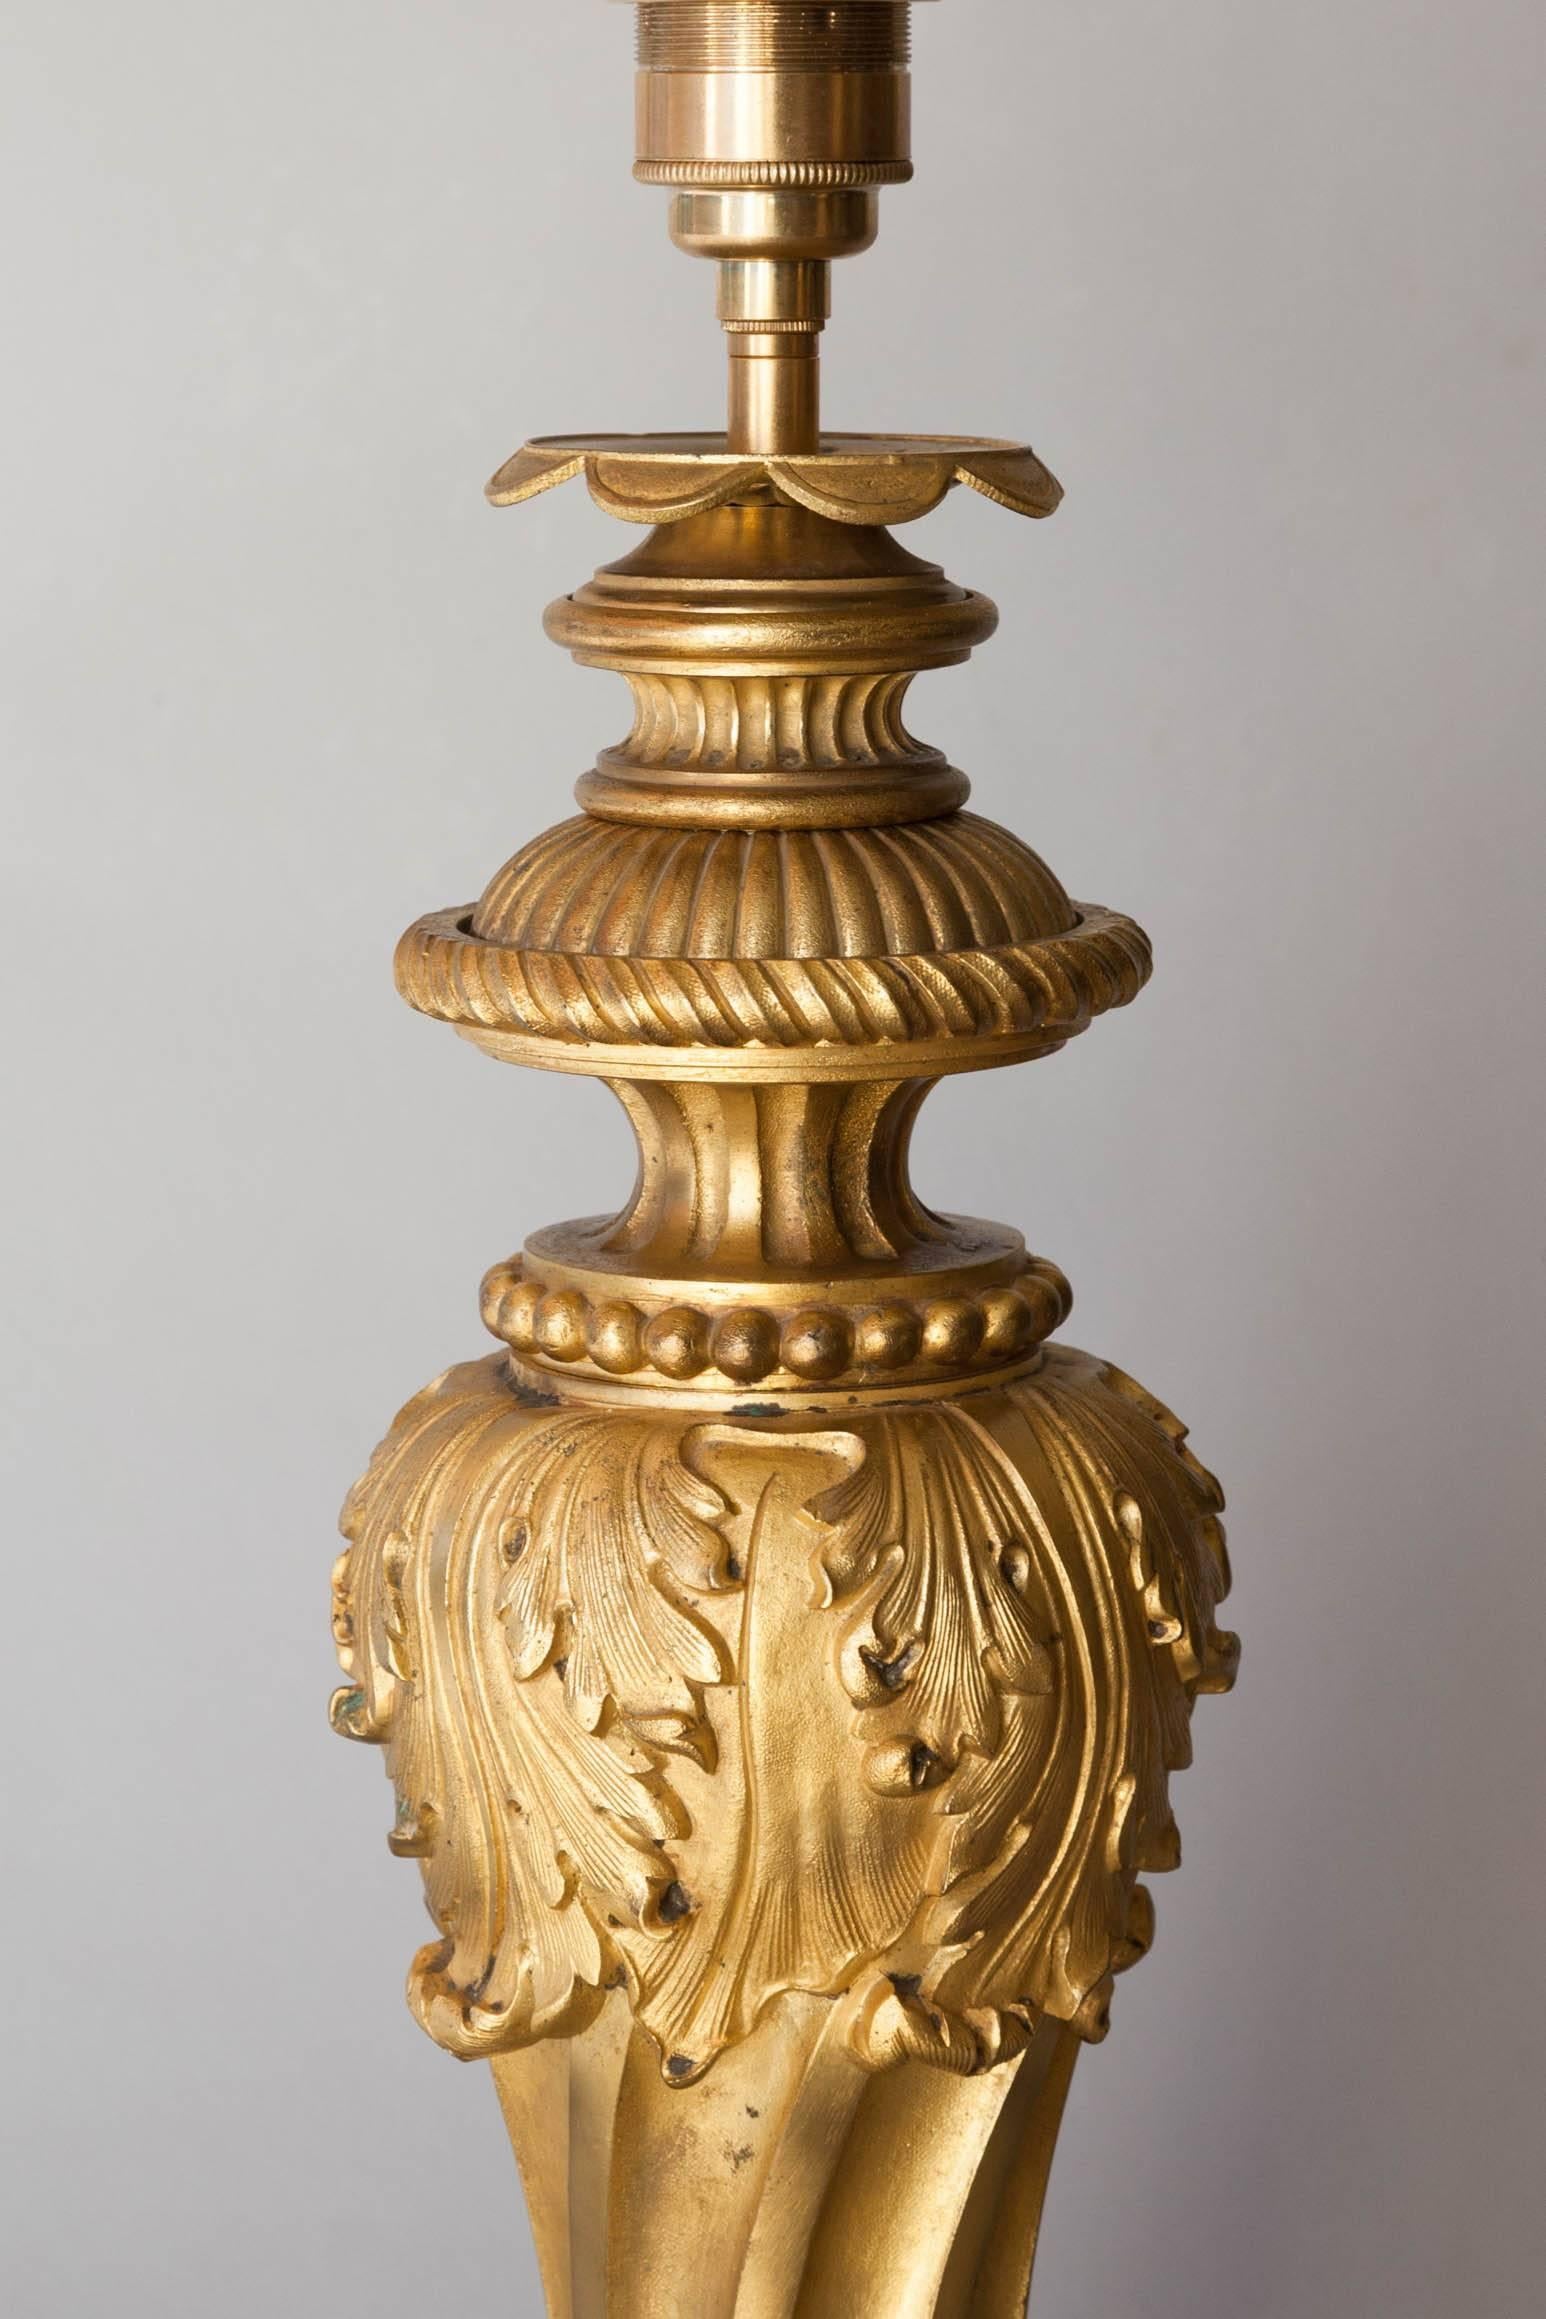 Gadrooned gilt bronze cast baluster column with acanthus leaves and a beading. Currently electrified for the UK.
France, circa 1890. Shown with a 20" silk shade available separately.

We are members of LAPADA and CINOA.